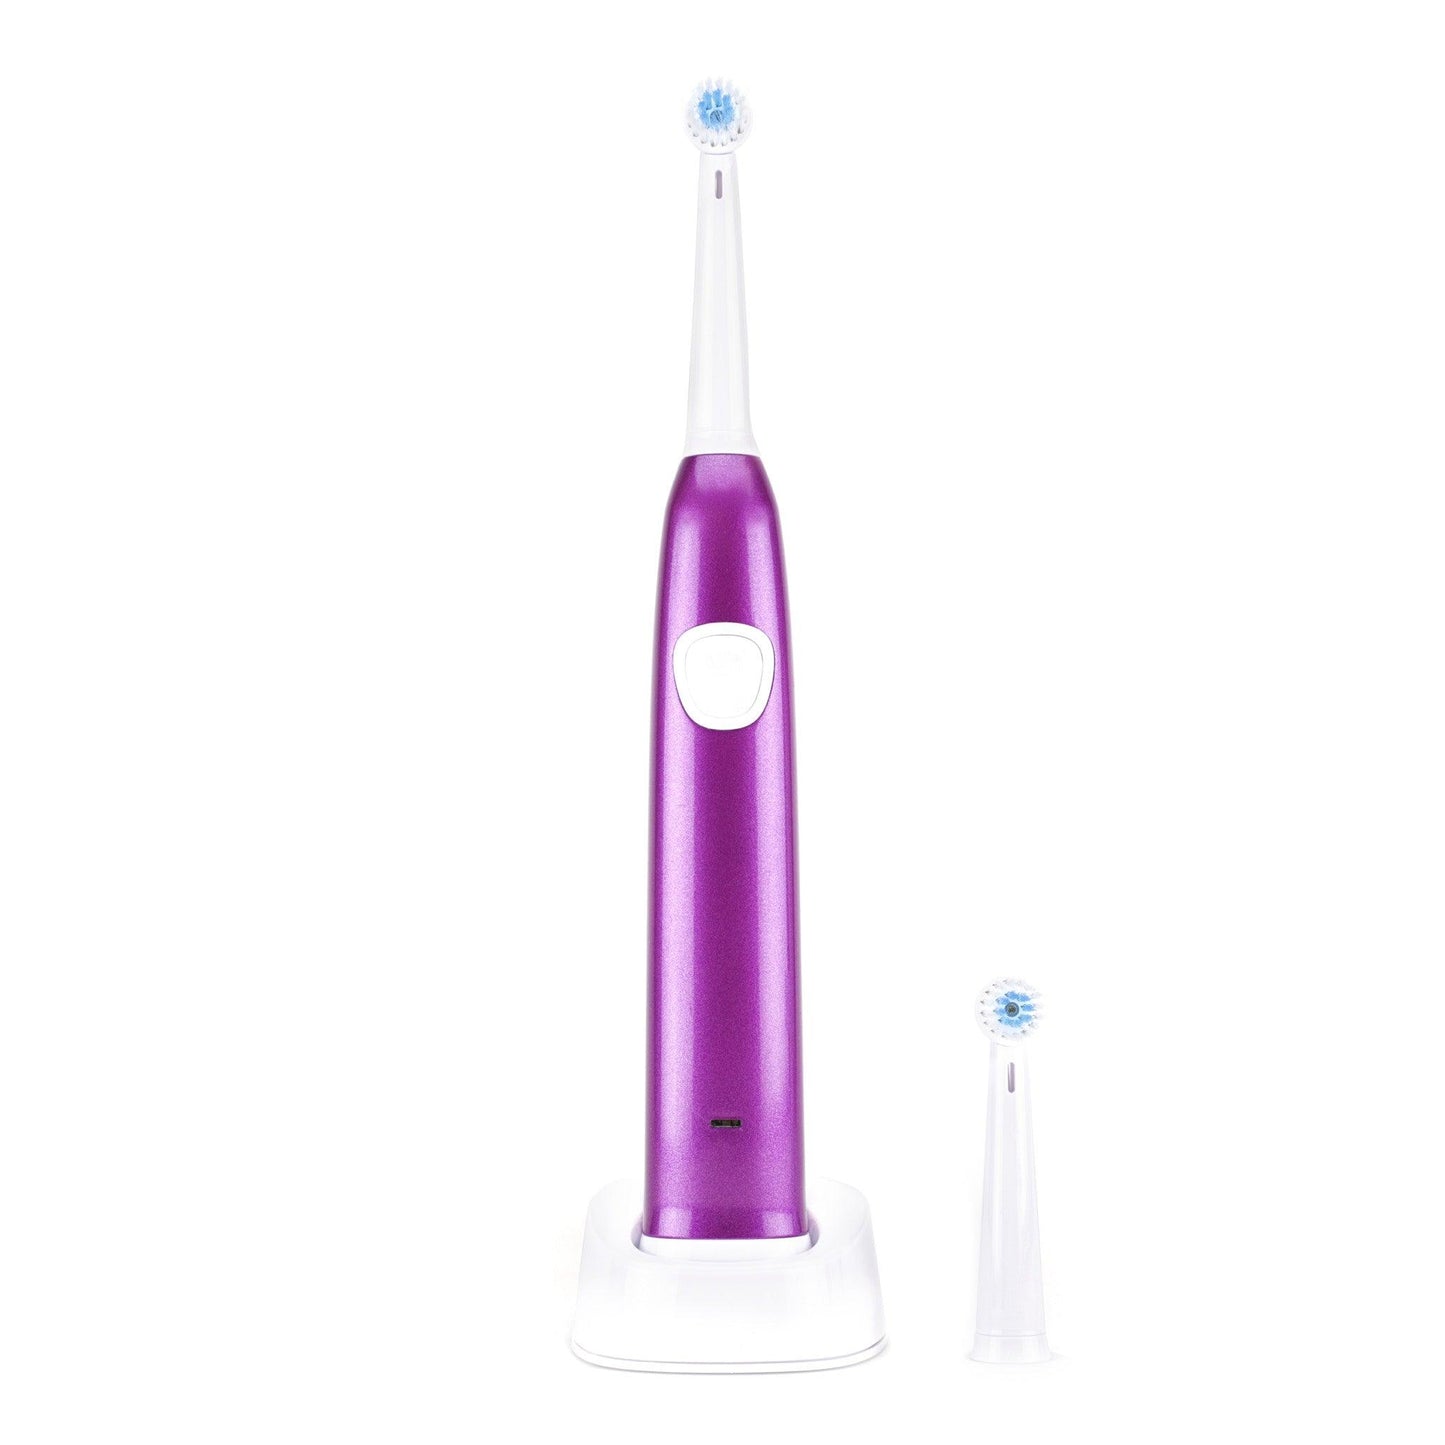 Electronic toothbrushes (10 styles) - Photography and Web Design - Los Angeles, US based Shopify Experts Revo Designs